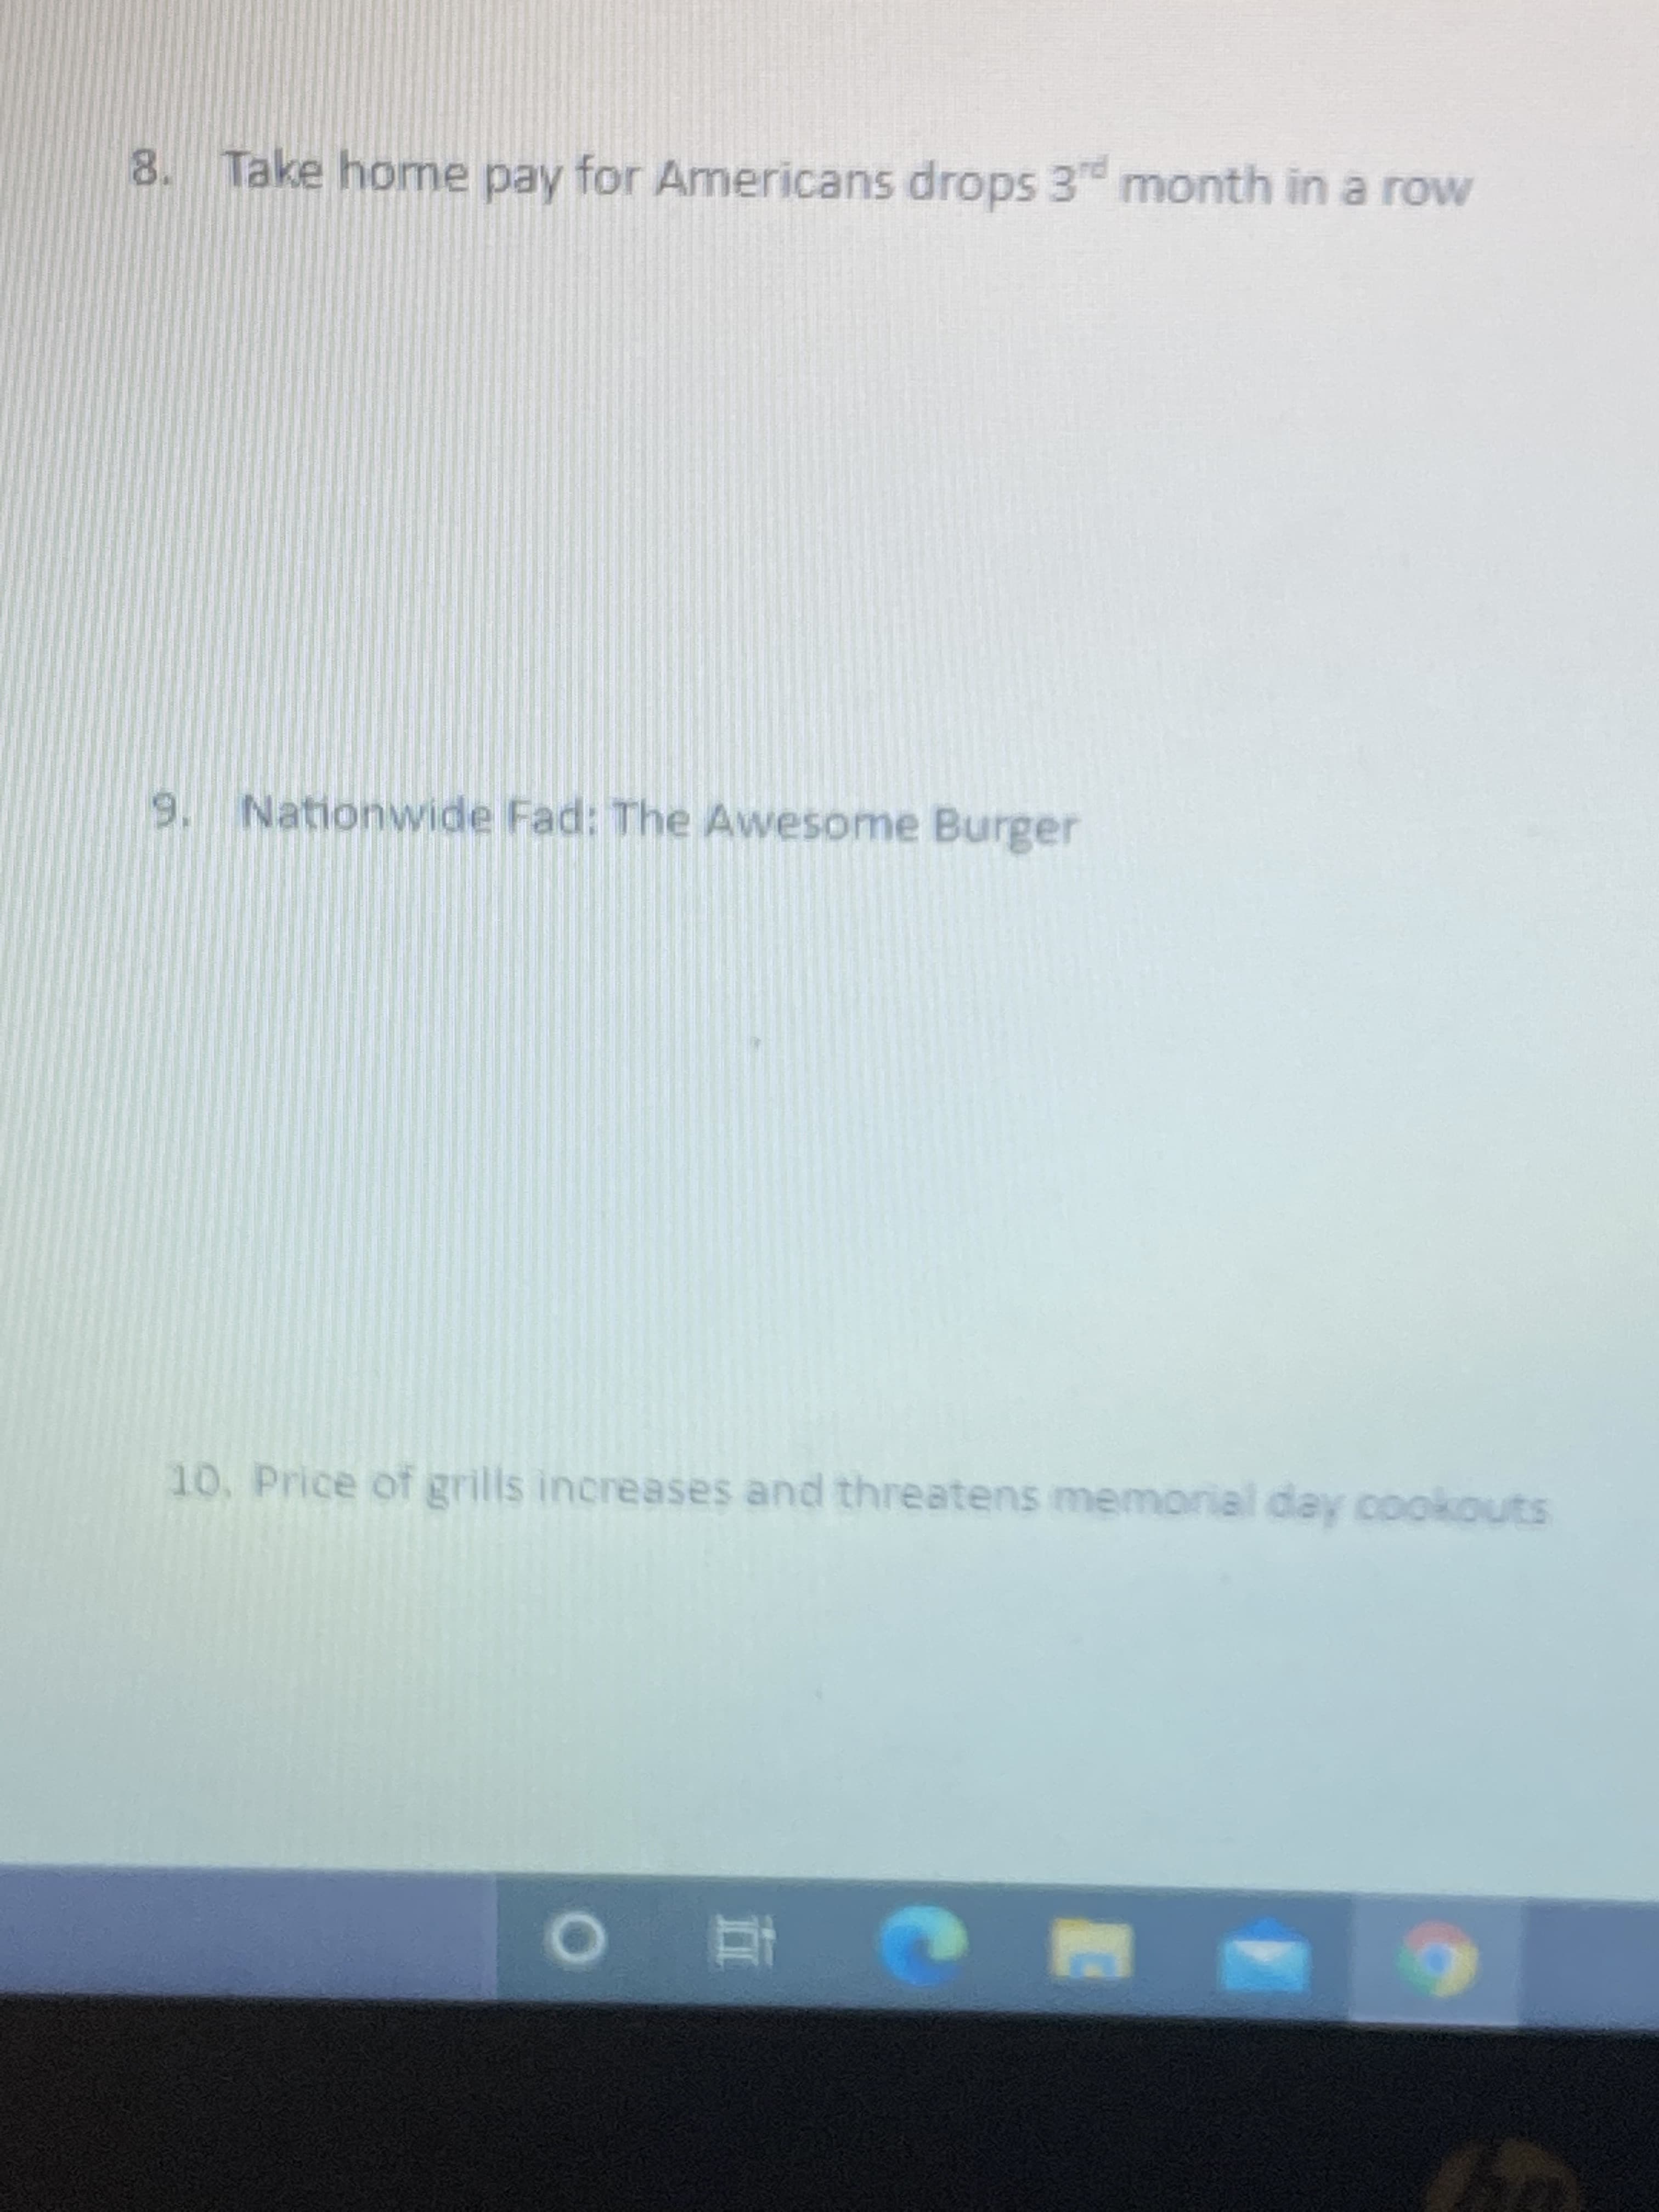 8. Take home pay for Americans drops 3 month in a row
9. Nationwide Fad: The Awesome Burger
10. Price of grills increases and threatens memorial day cookouts
| 在
